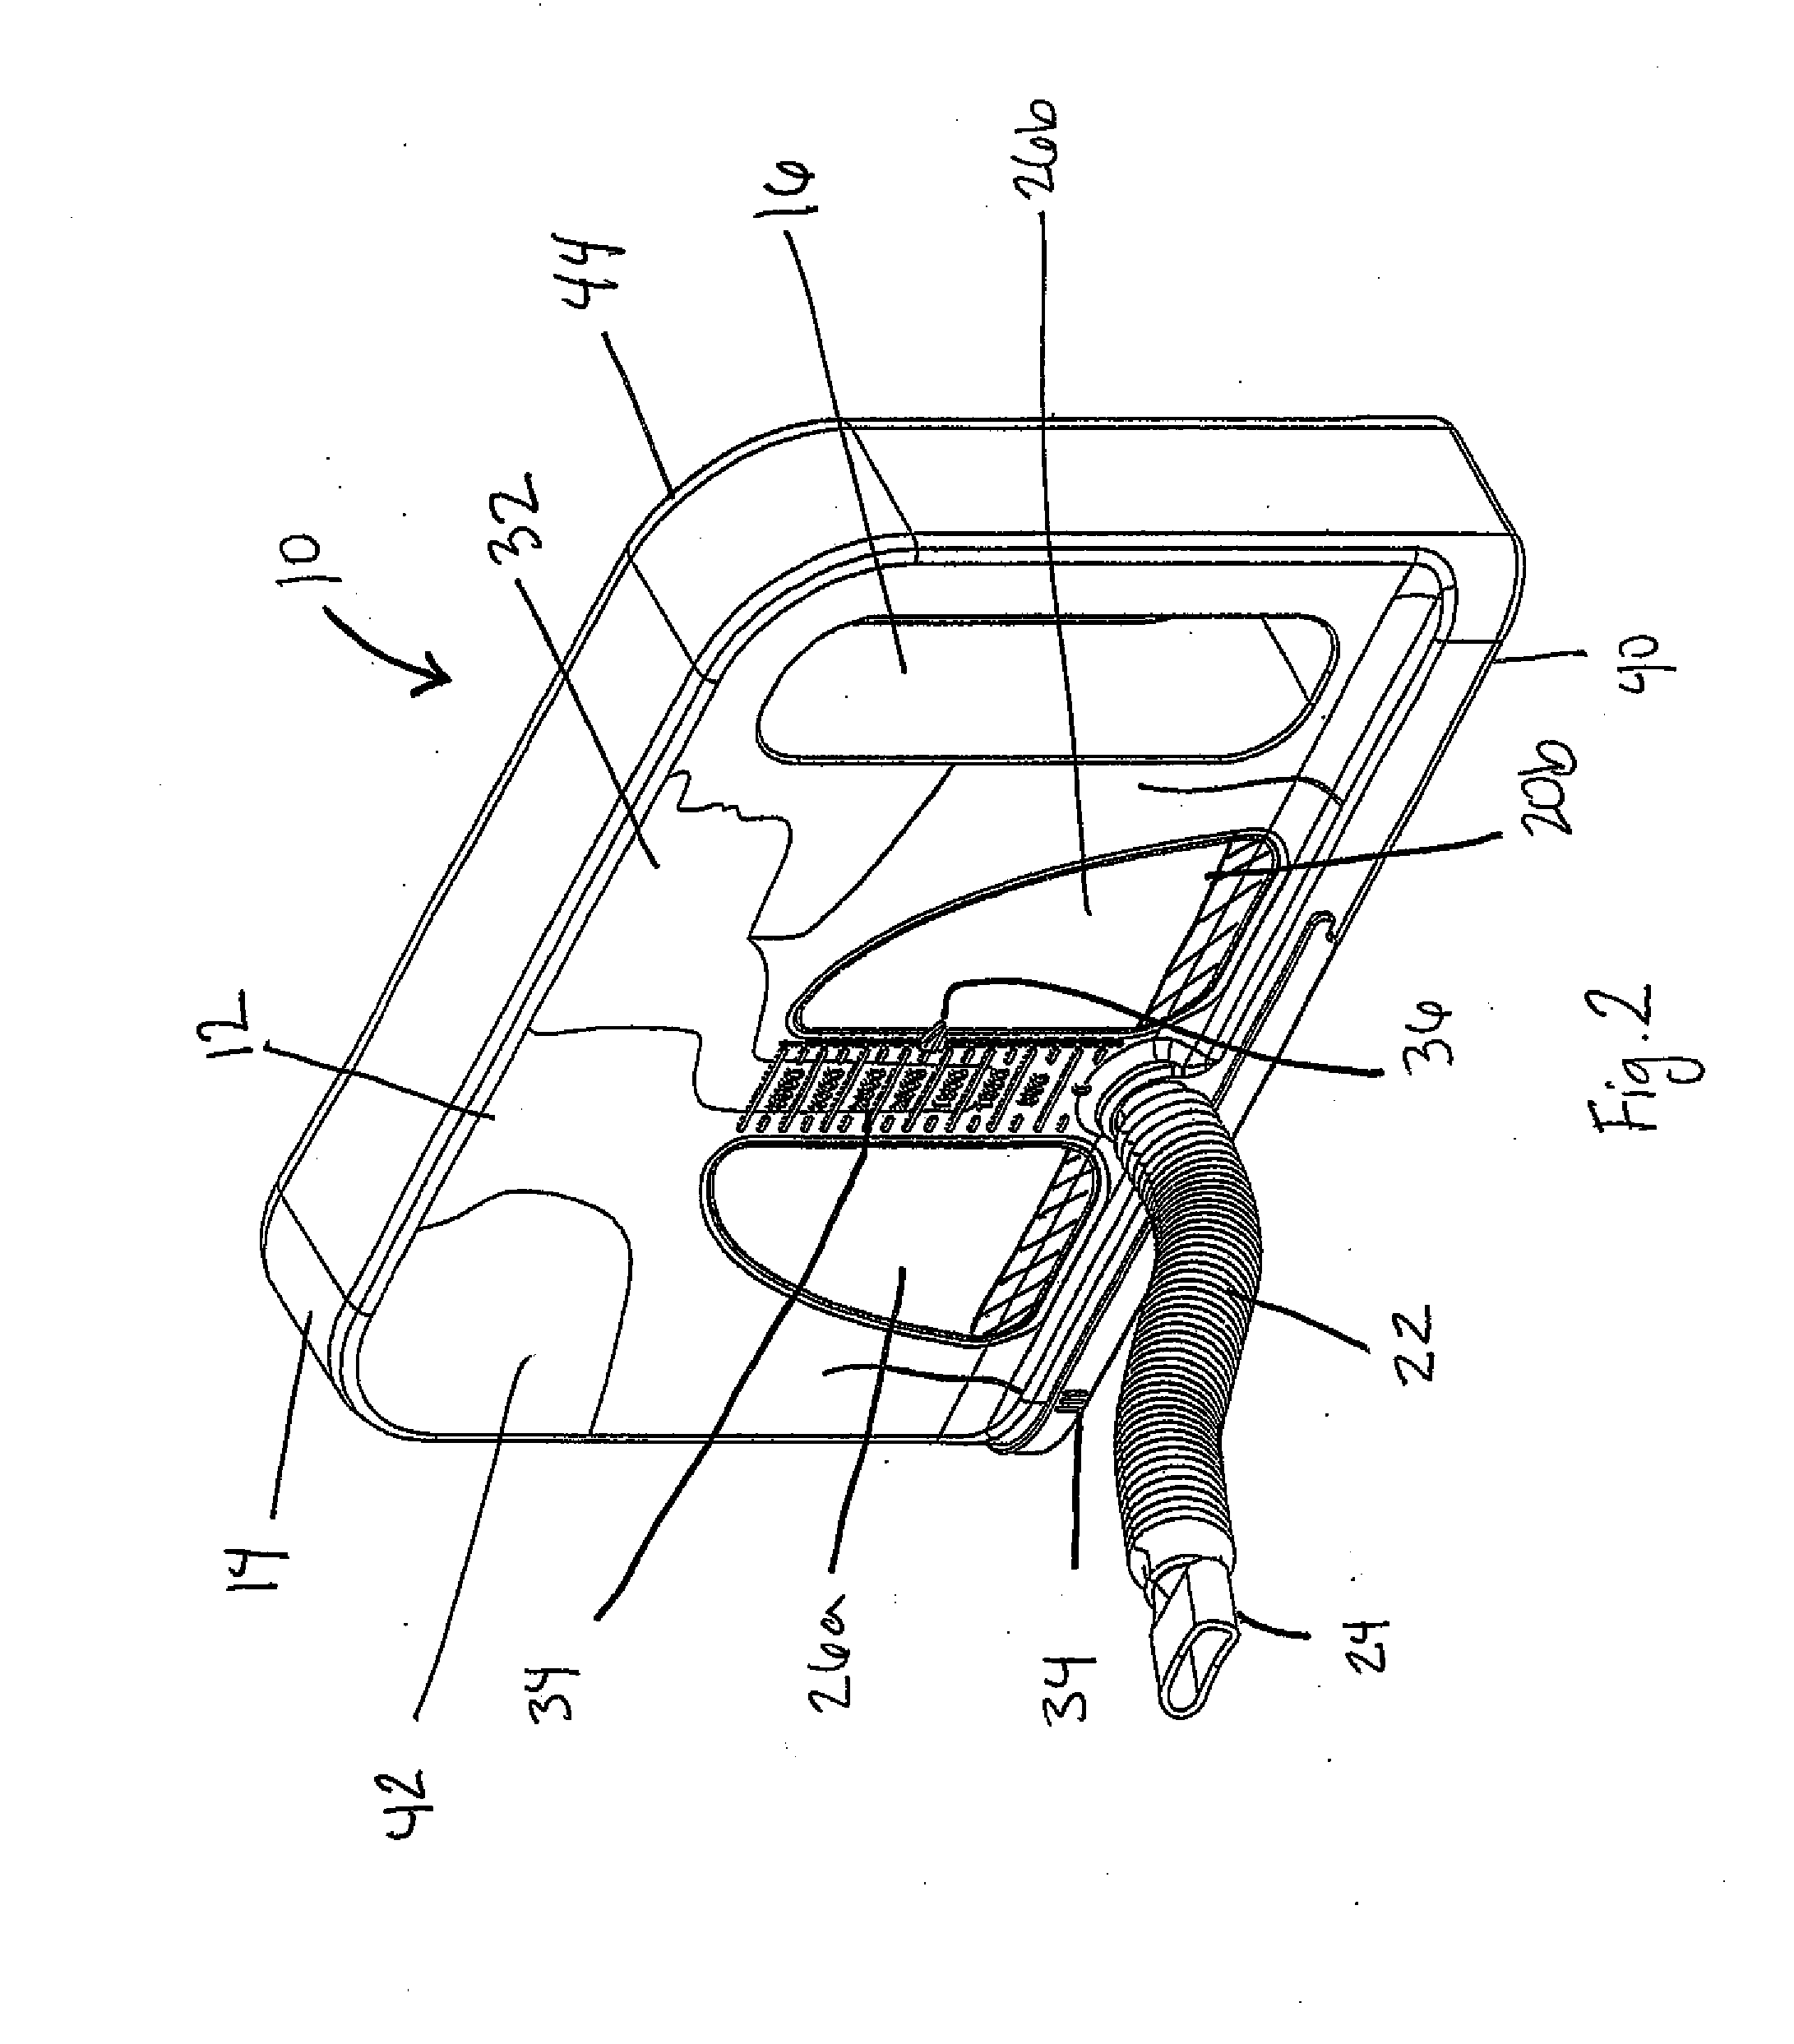 Spirometer device with visual aid for therapeutic breathing